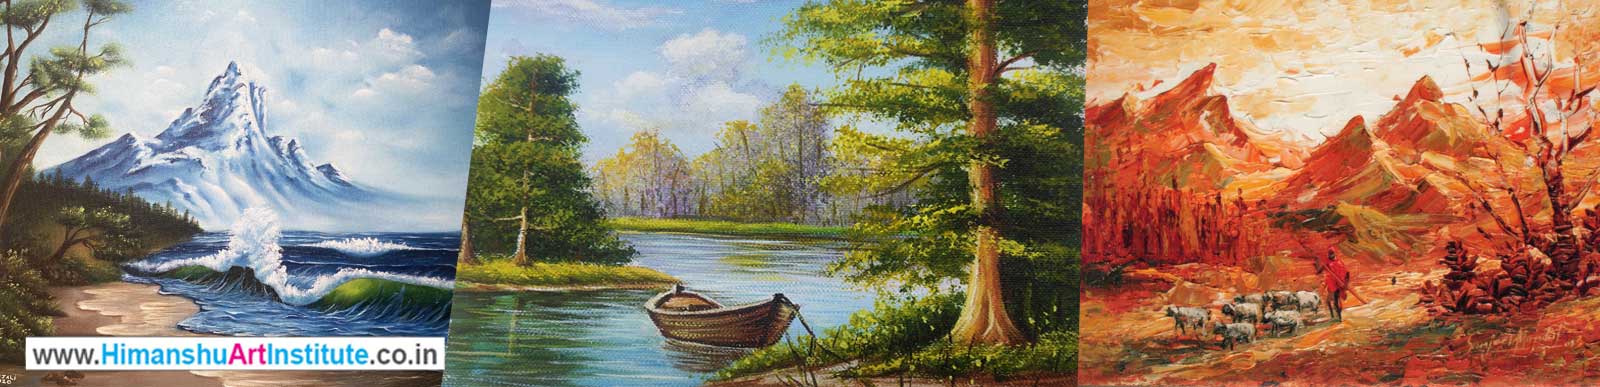 Professional Certificate Course in Landscapes Painting, Online Best Painting Classes in Delhi, India